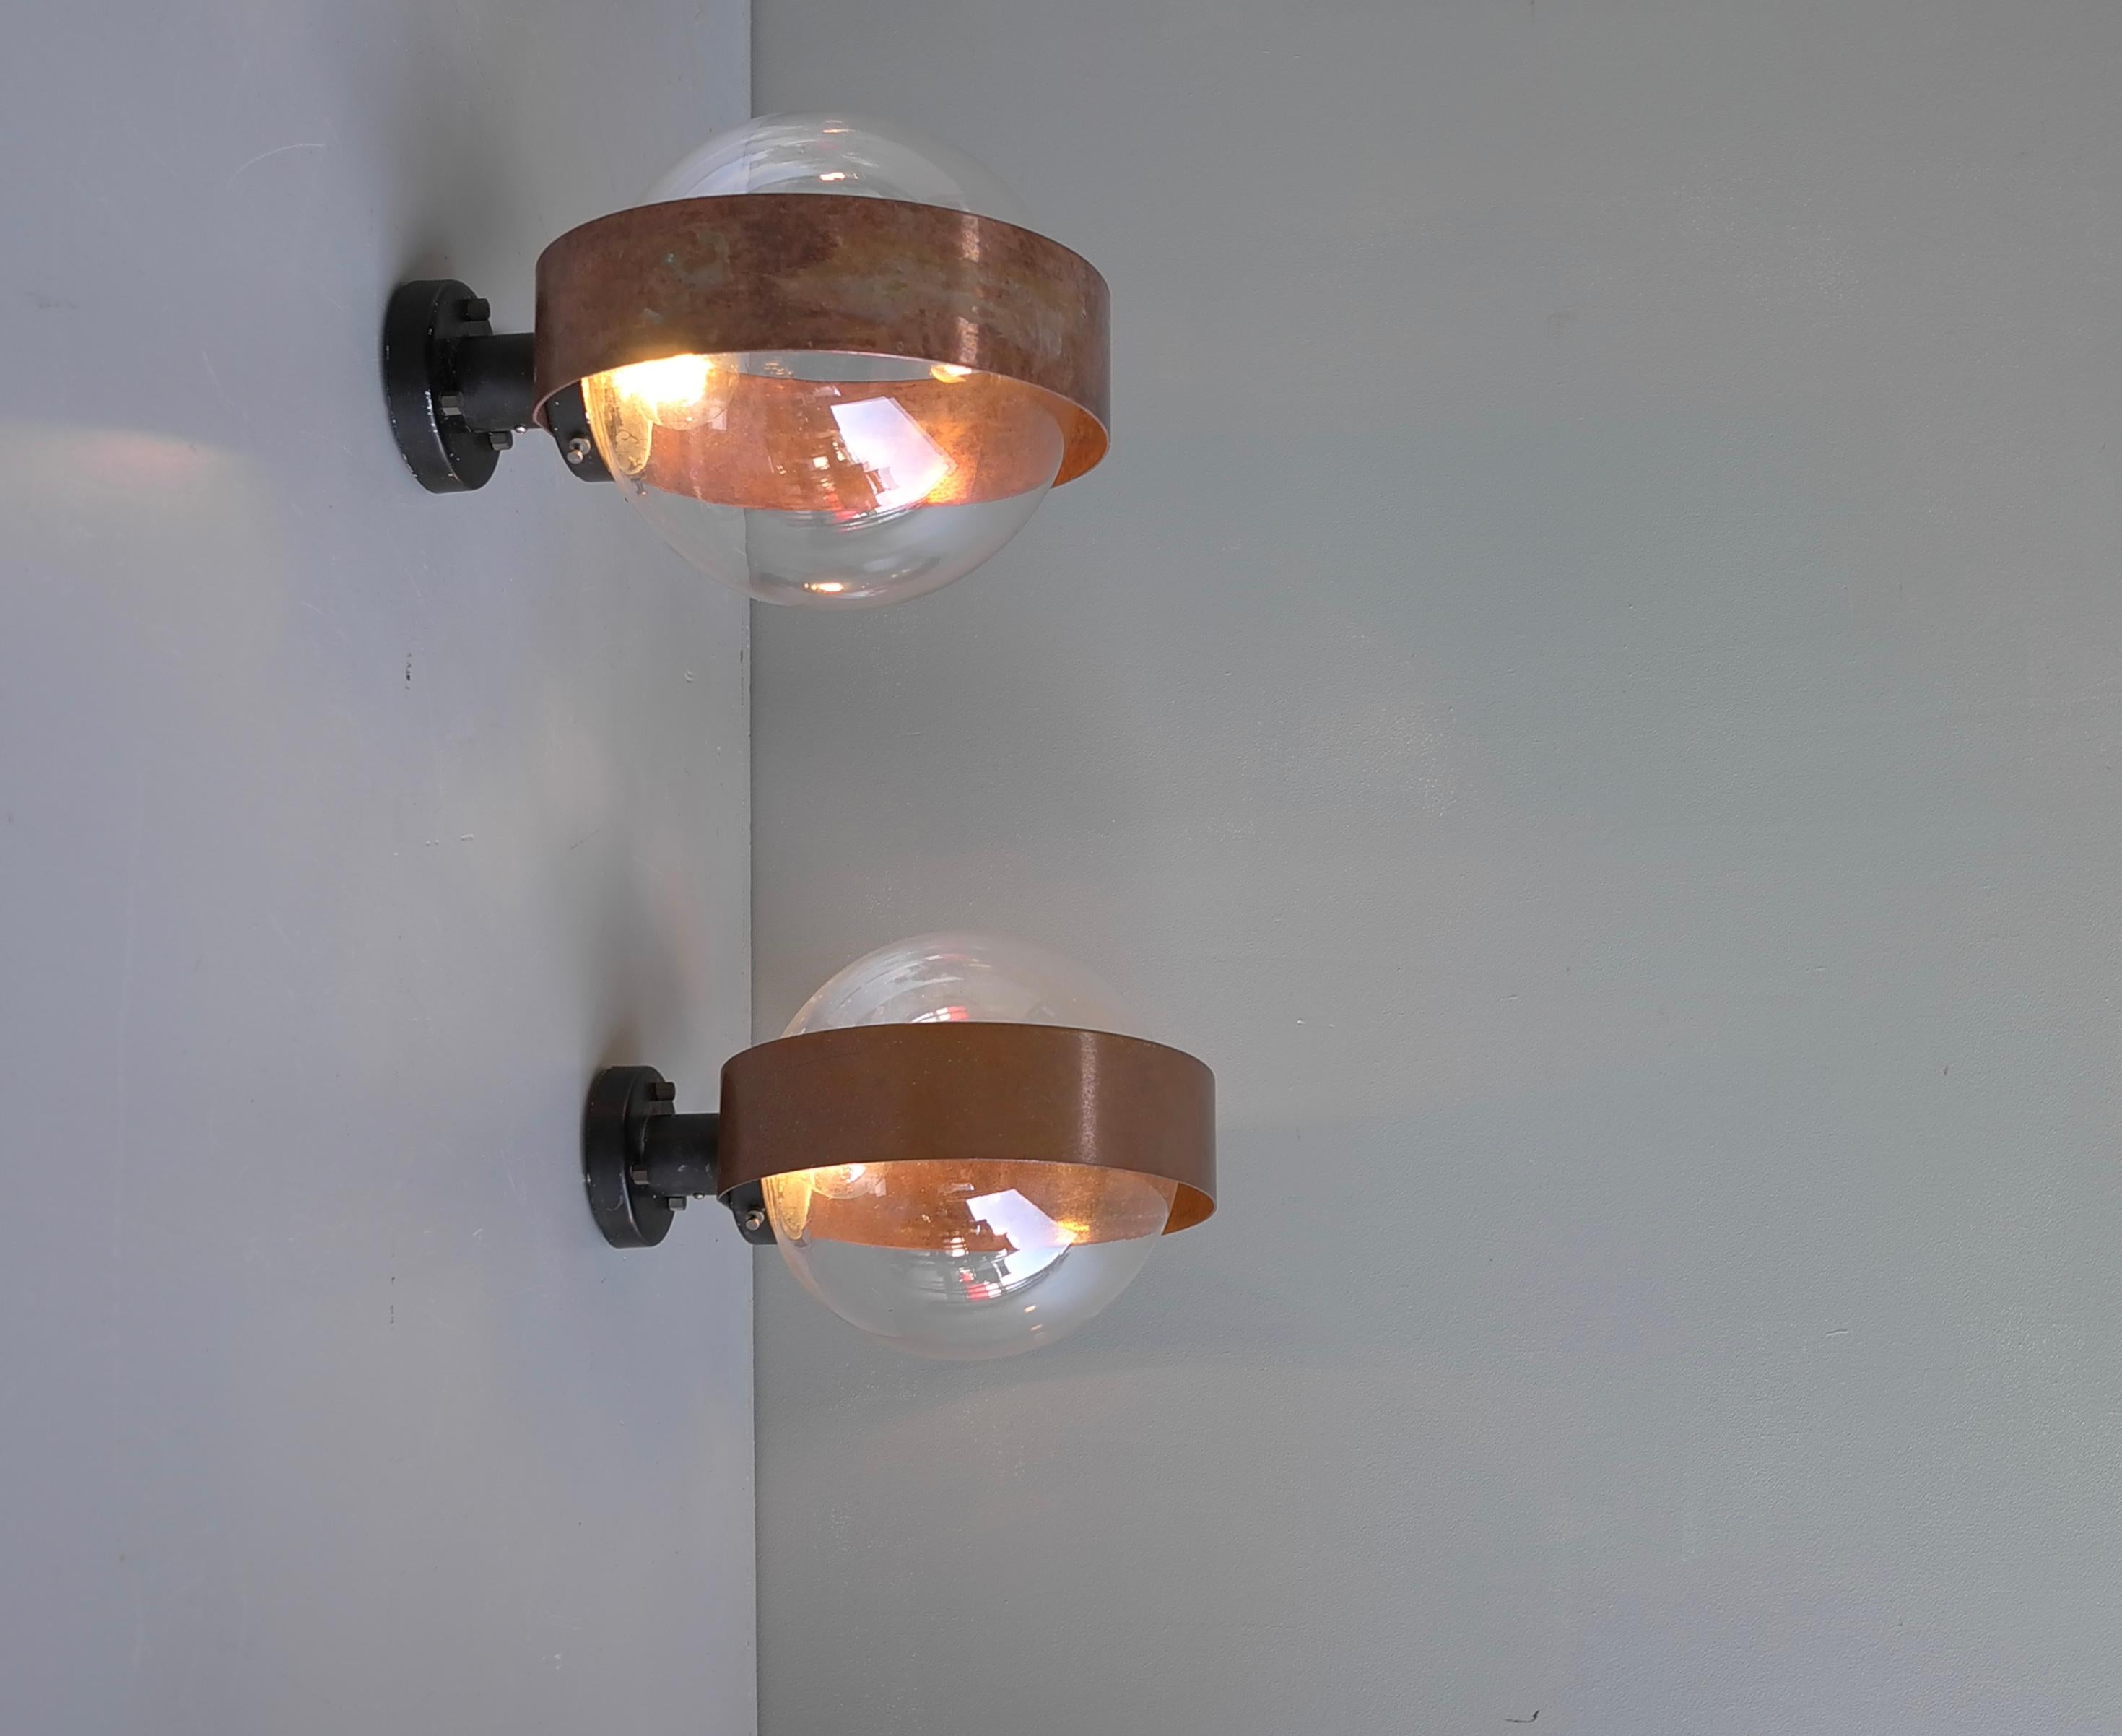 Pair of Scandinavian Glass Ball Wall lamps with Copper Patina Rims, 1960's For Sale 7